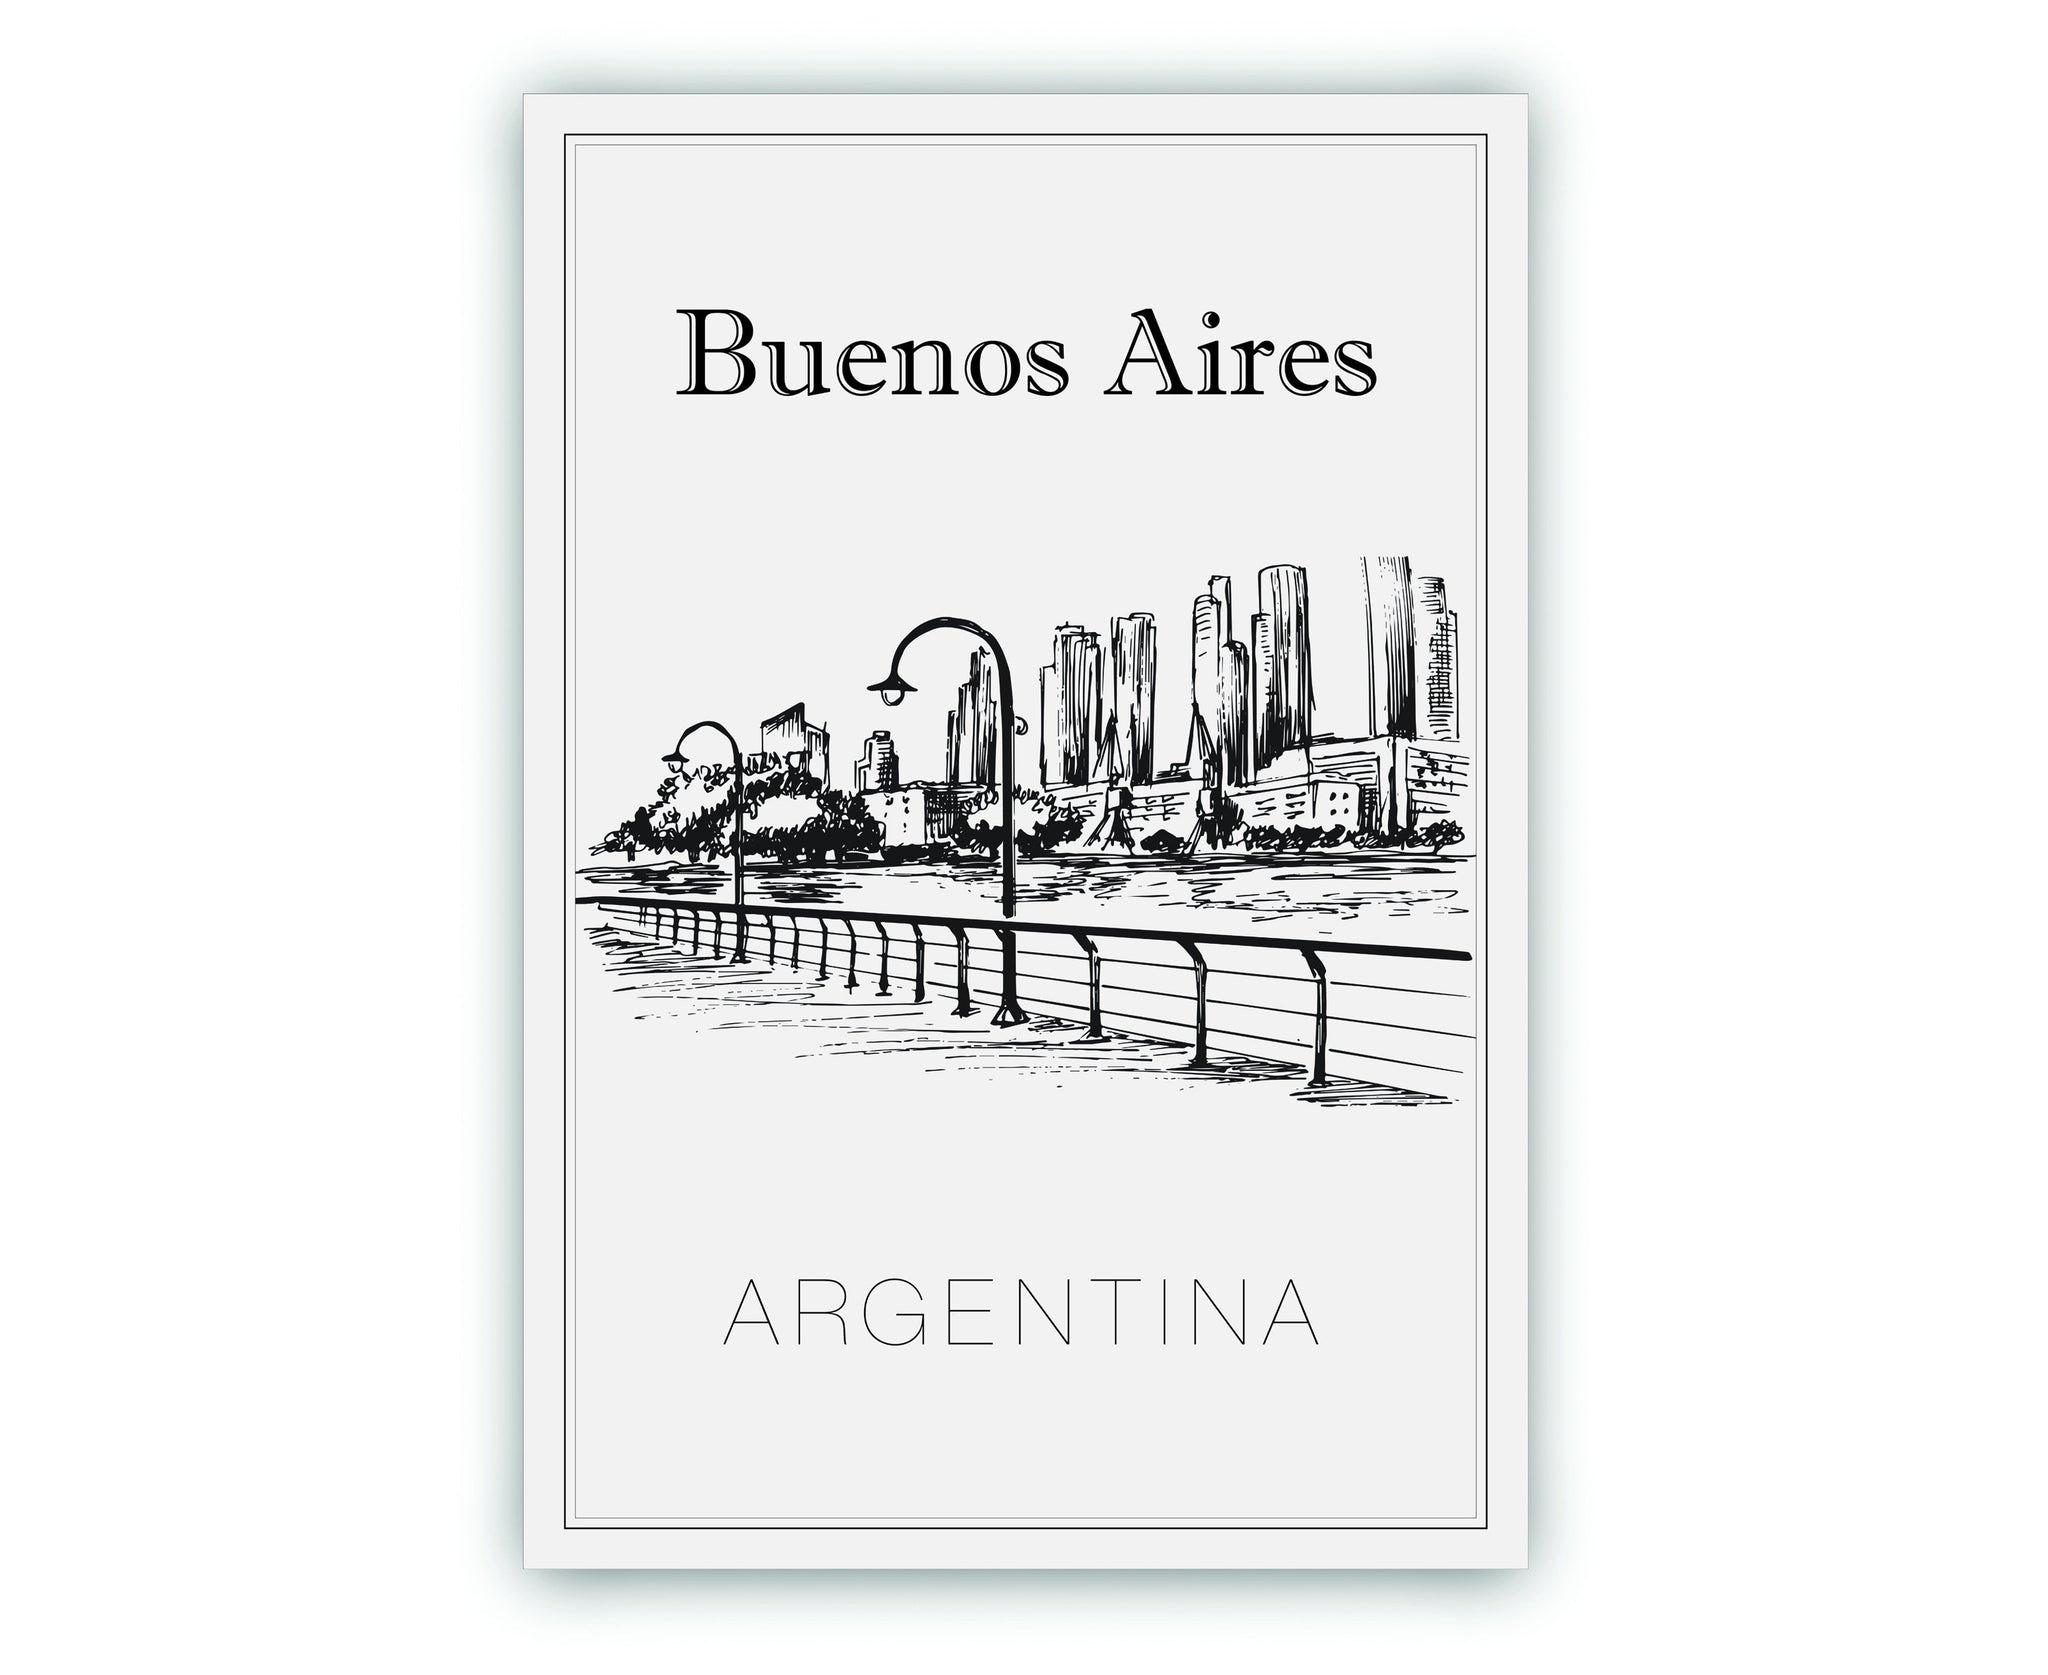 Hand Drawn Poster, Buenos Aires Travel Poster, Argentina Poster Wall Art, Buenos Aires Cityscape and Landmark Map, City Map Poster For Home